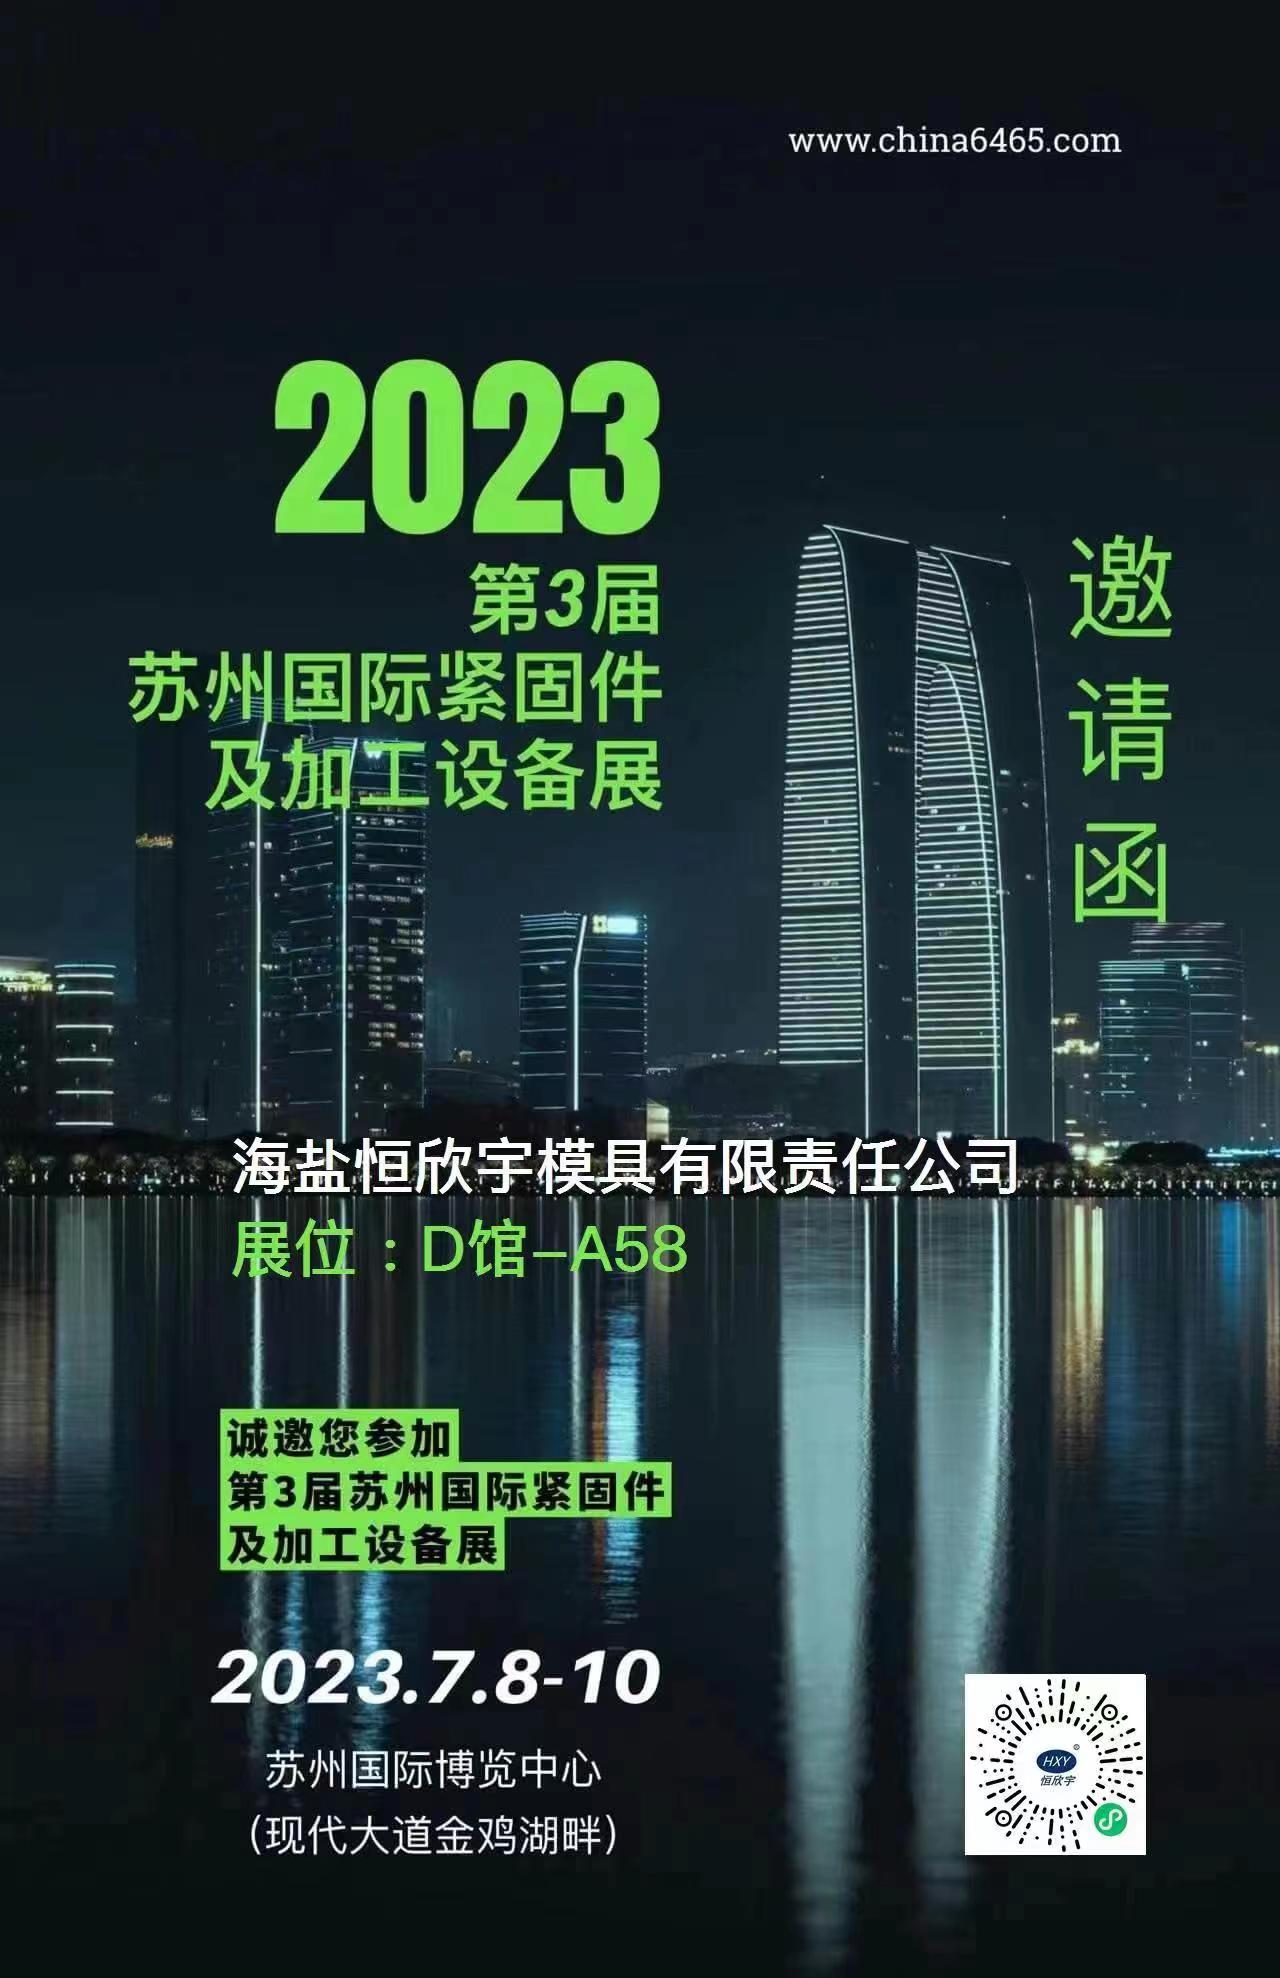 The 3rd Suzhou International Fascination Exhibition in 2023